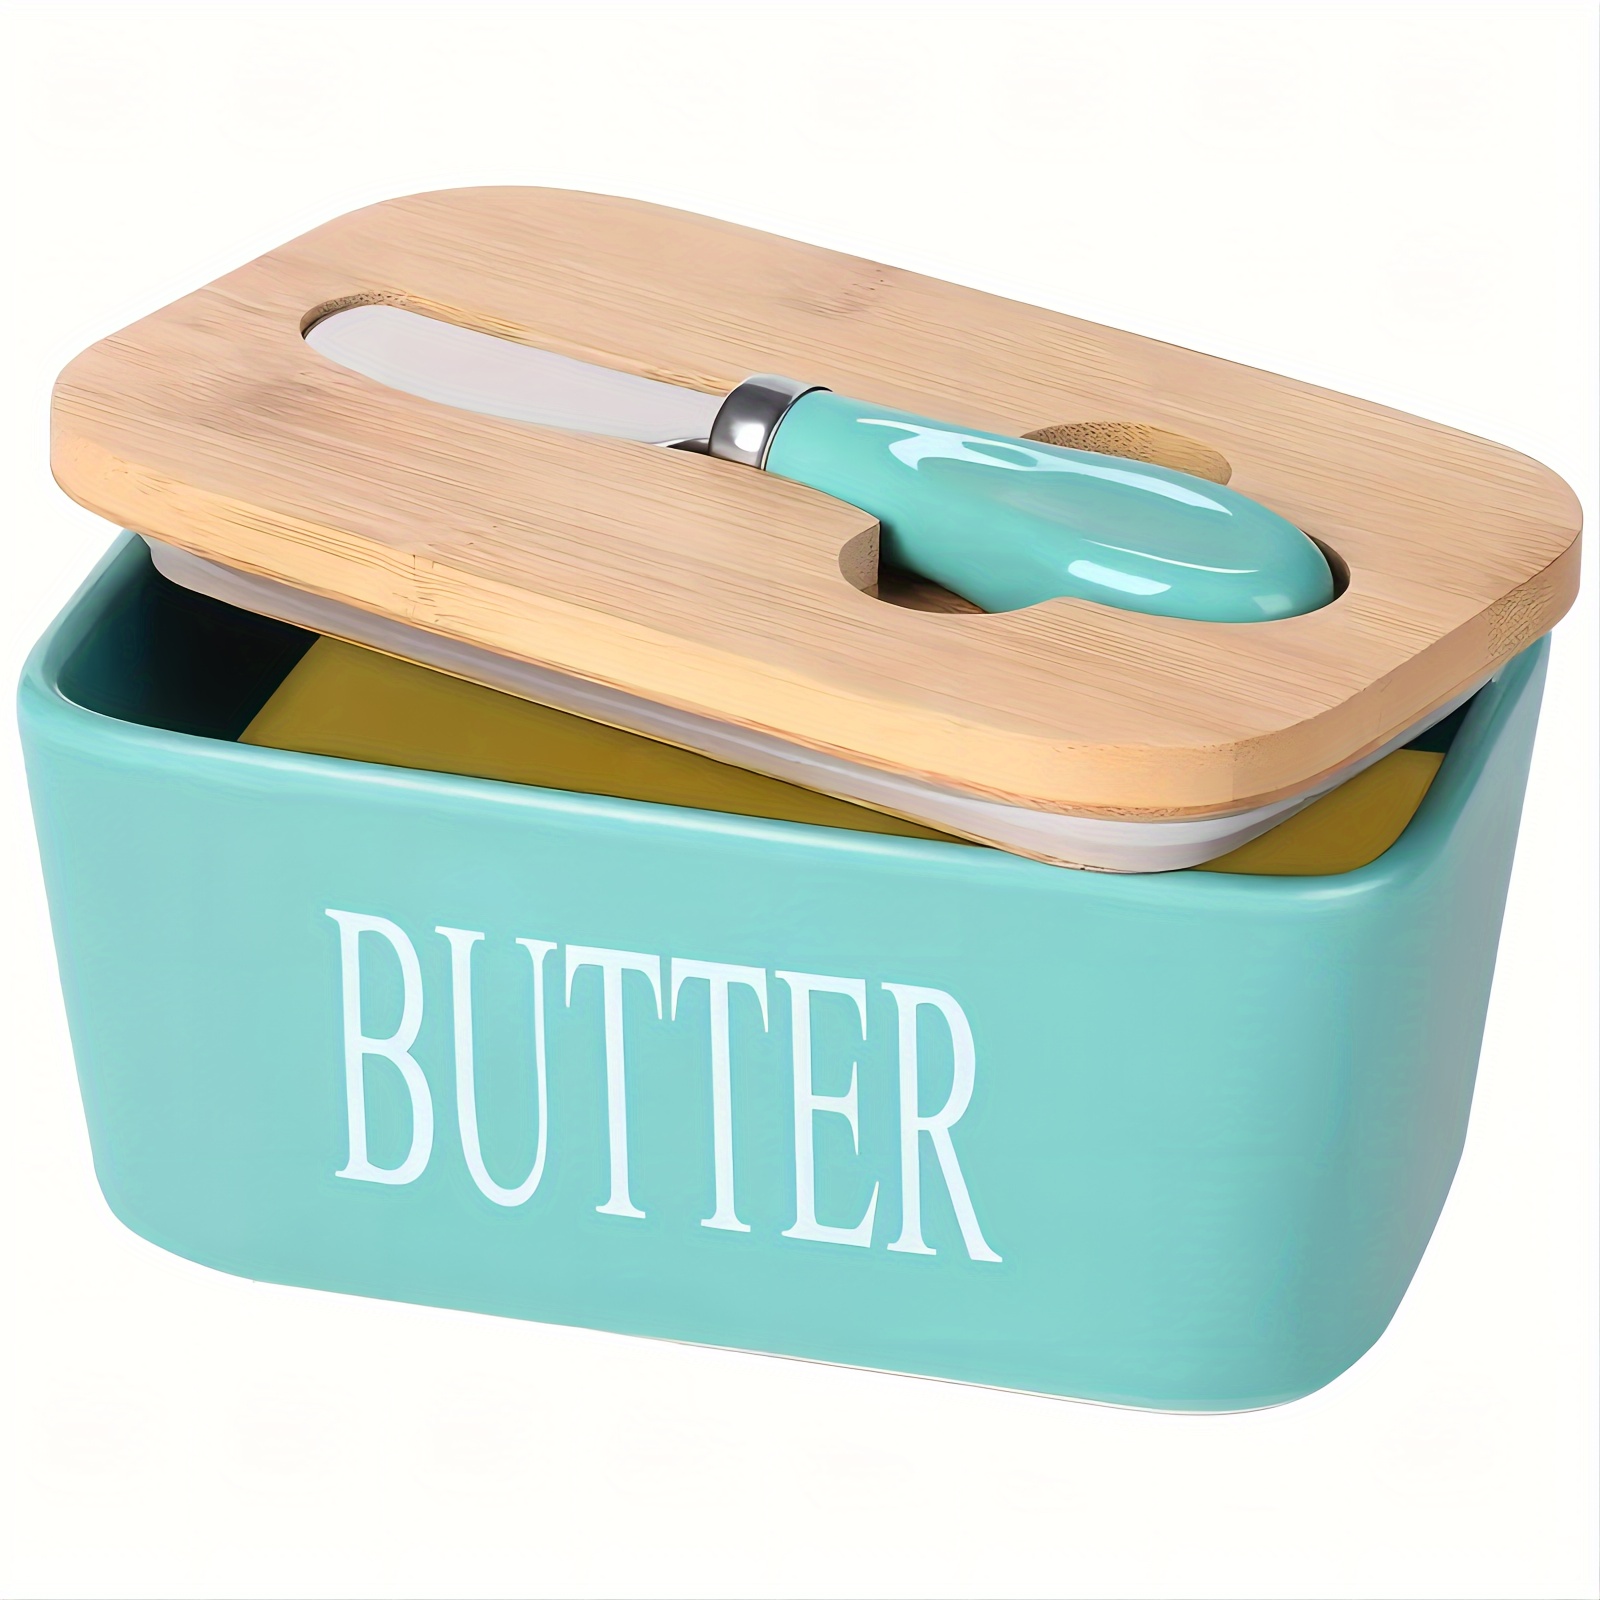 Ceramic Sealing Butter Box Holder Cheese Food Butter Keeper Tray